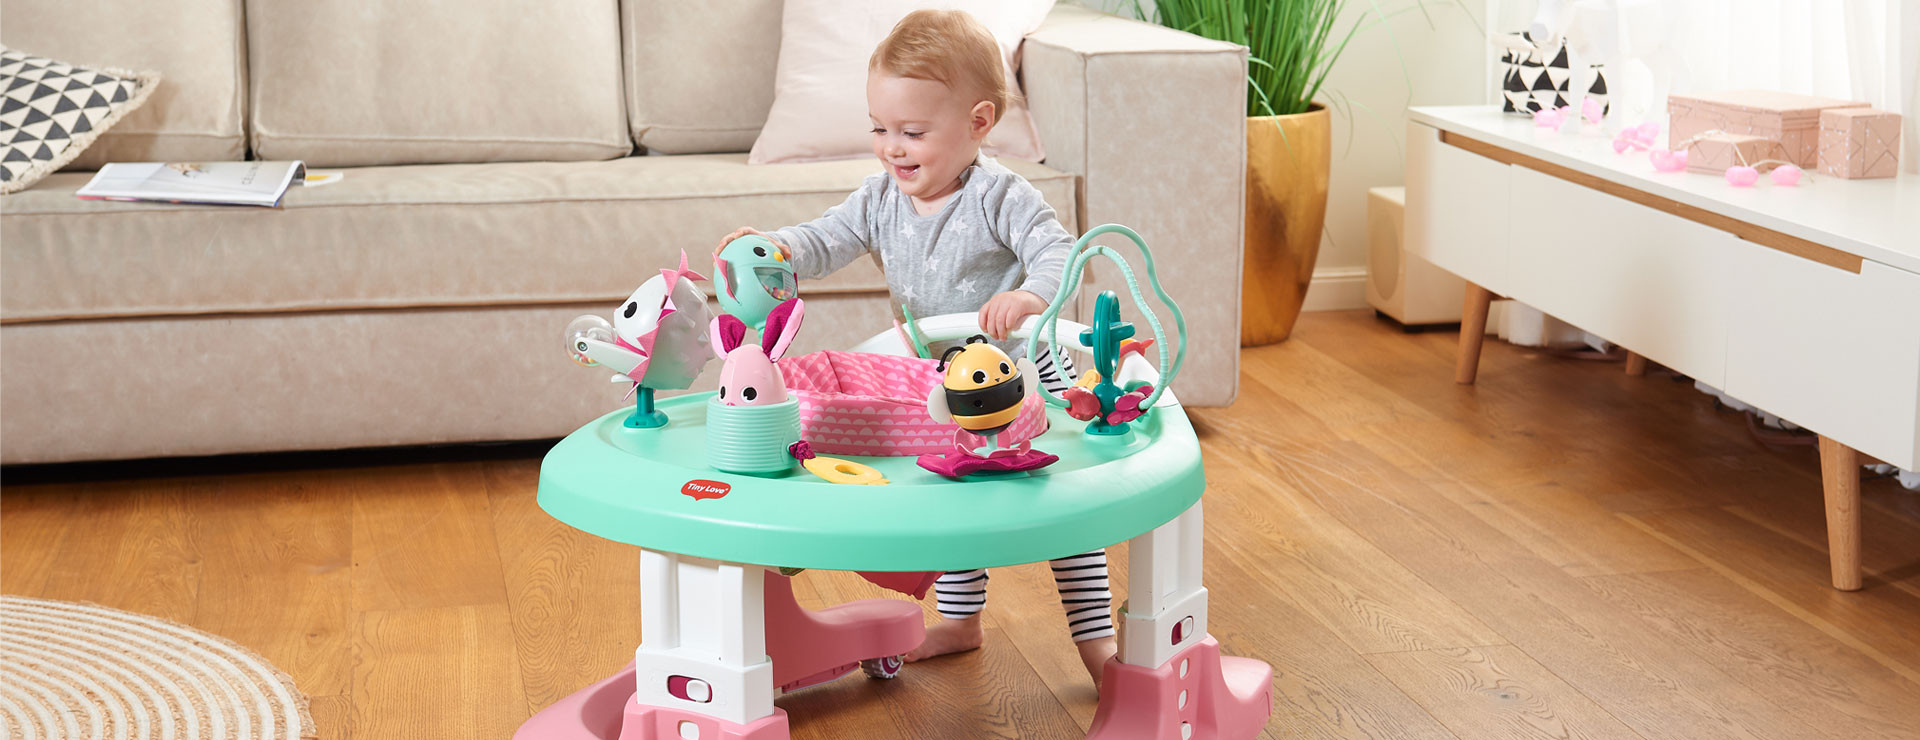 Used as a stationary activity center, push along, jumper or walker